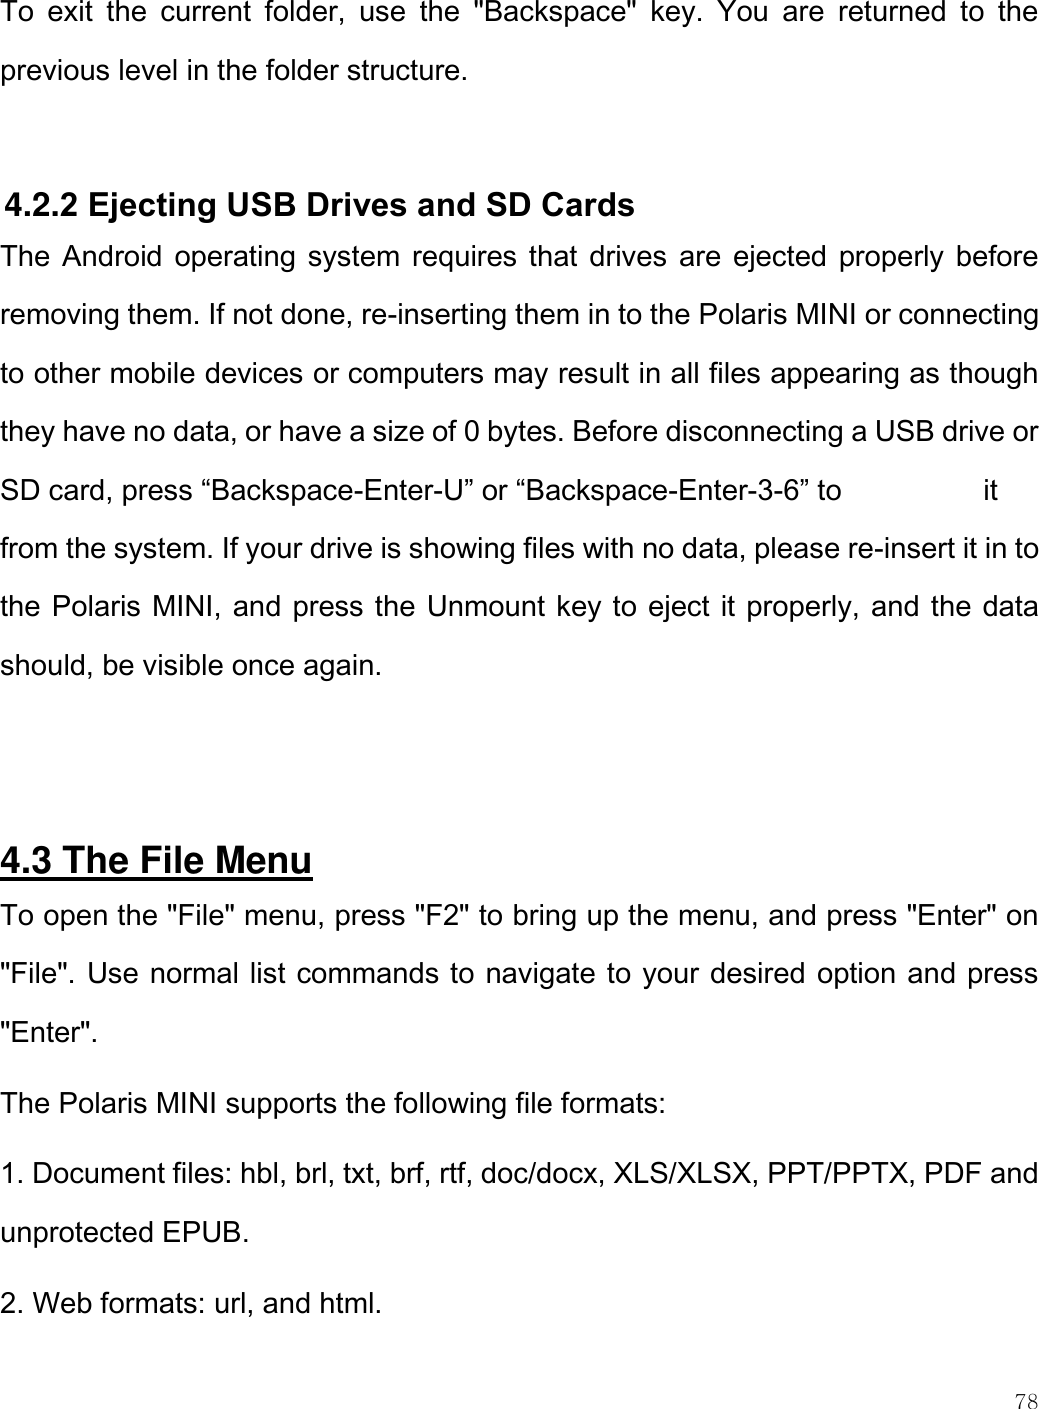    78  To  exit  the  current  folder,  use  the  &quot;Backspace&quot;  key.  You  are  returned  to  the previous level in the folder structure.   4.2.2 Ejecting USB Drives and SD Cards The Android operating system requires that drives  are ejected properly before removing them. If not done, re-inserting them in to the Polaris MINI or connecting to other mobile devices or computers may result in all files appearing as though they have no data, or have a size of 0 bytes. Before disconnecting a USB drive or SD card, press “Backspace-Enter-U” or “Backspace-Enter-3-6” to      it from the system. If your drive is showing files with no data, please re-insert it in to the Polaris MINI, and press the Unmount key to eject it properly, and the data should, be visible once again.   4.3 The File Menu To open the &quot;File&quot; menu, press &quot;F2&quot; to bring up the menu, and press &quot;Enter&quot; on &quot;File&quot;. Use normal list commands to navigate to your desired option and press &quot;Enter&quot;. The Polaris MINI supports the following file formats:  1. Document files: hbl, brl, txt, brf, rtf, doc/docx, XLS/XLSX, PPT/PPTX, PDF and unprotected EPUB. 2. Web formats: url, and html.  